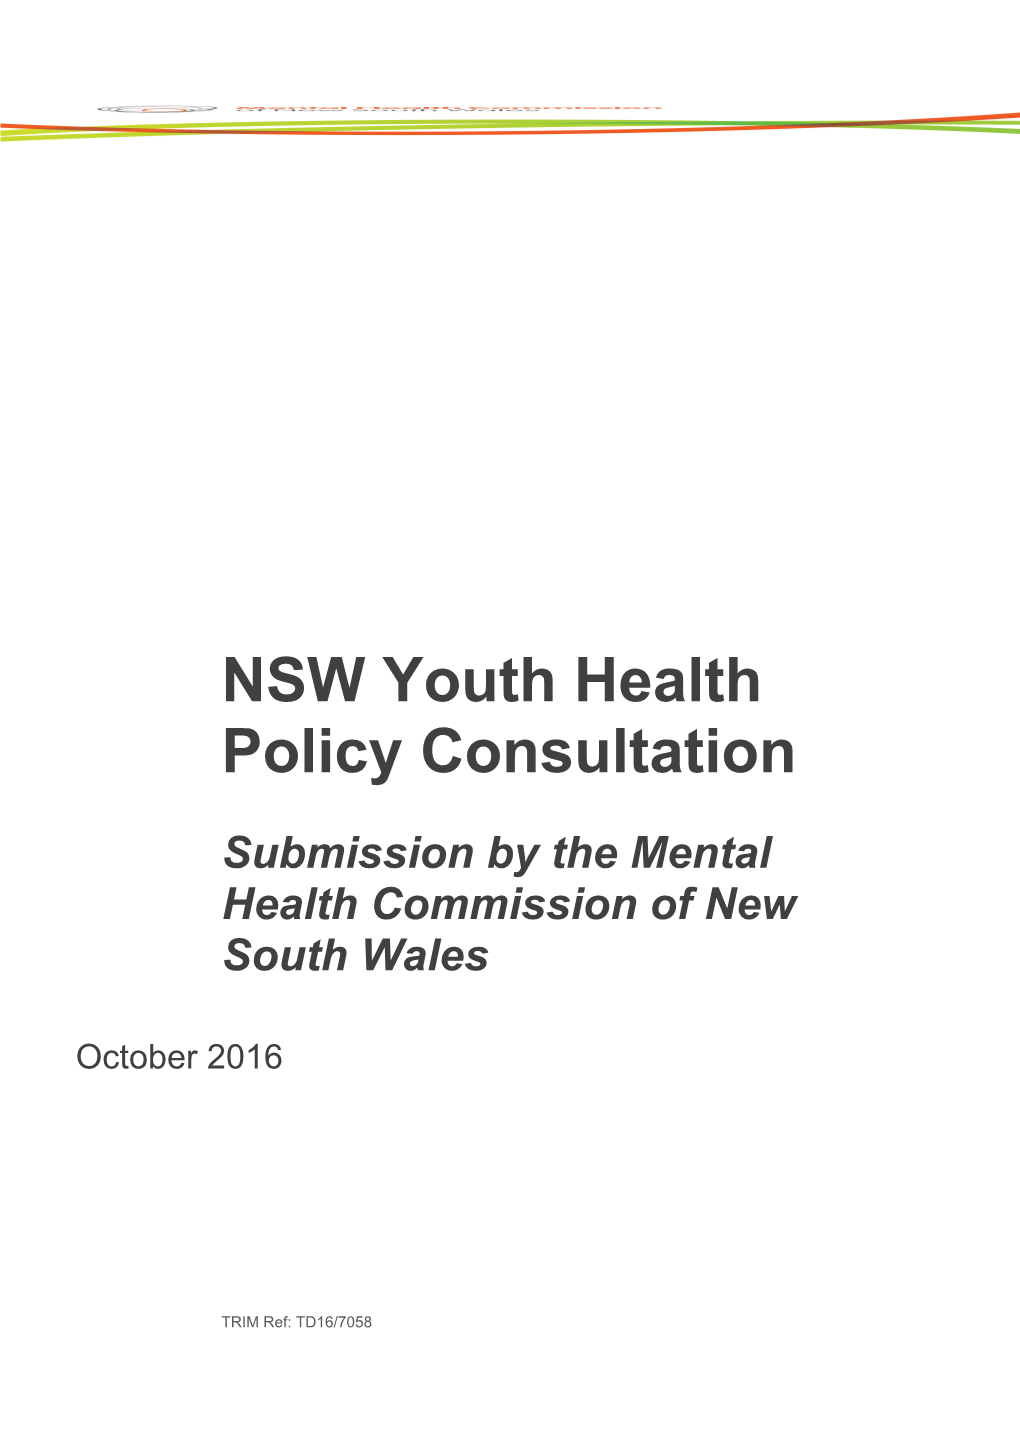 Submission by the Mental Health Commission of New South Wales